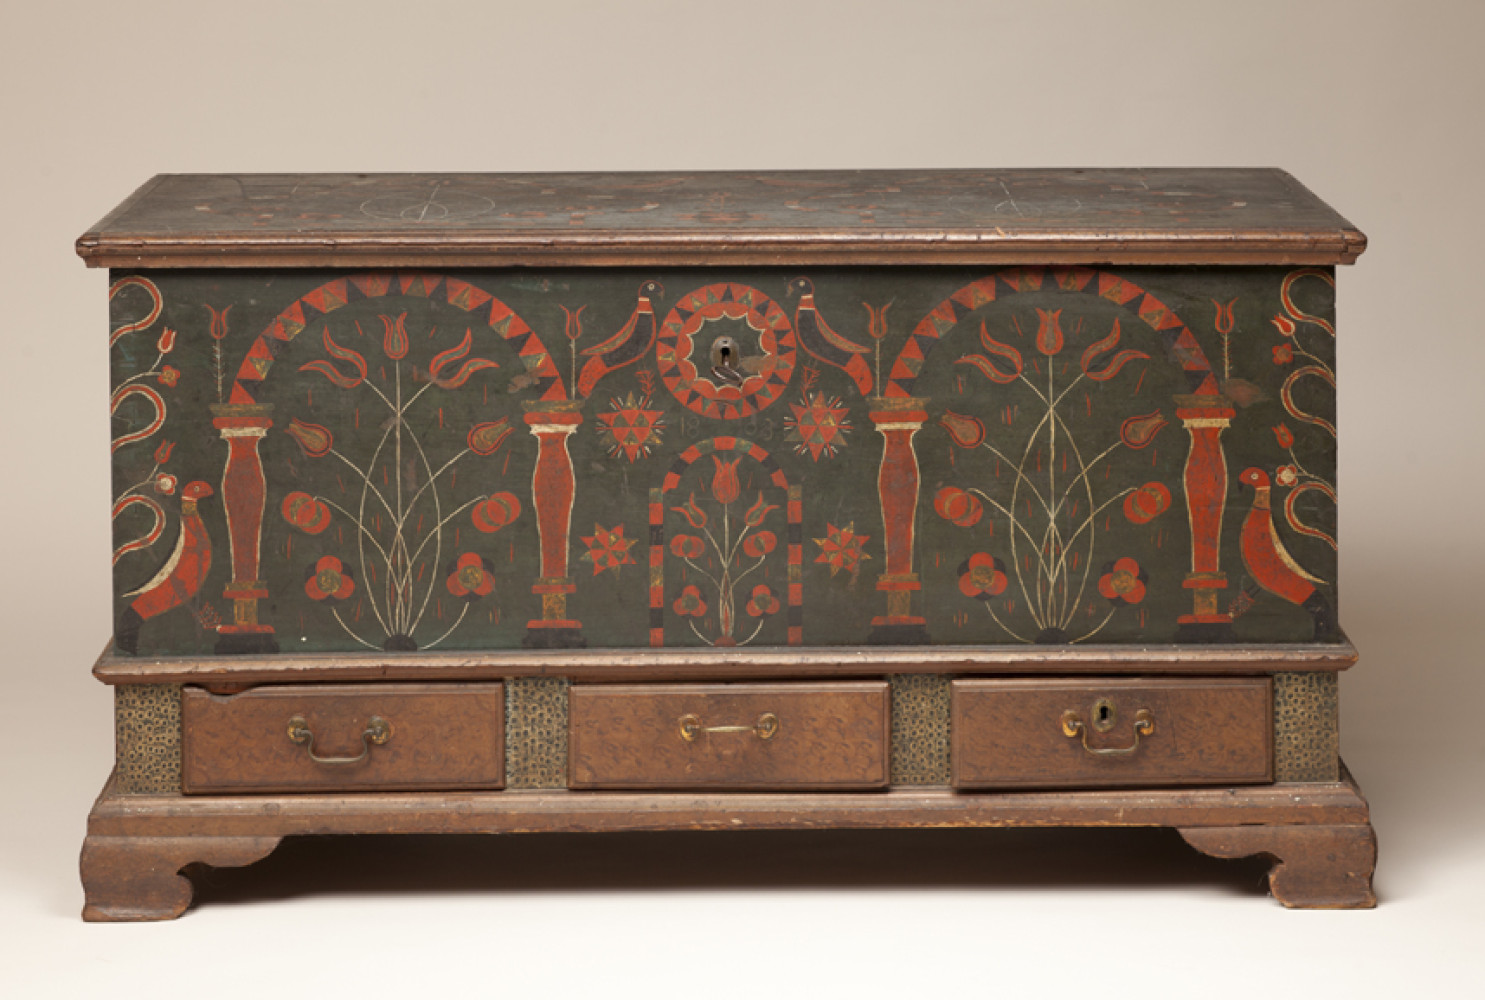 Chest over Drawers, 1803, Unidentified artist, Tulip poplar, brass, iron and paint, Courtesy of the Barbara L. Gordon Collection
